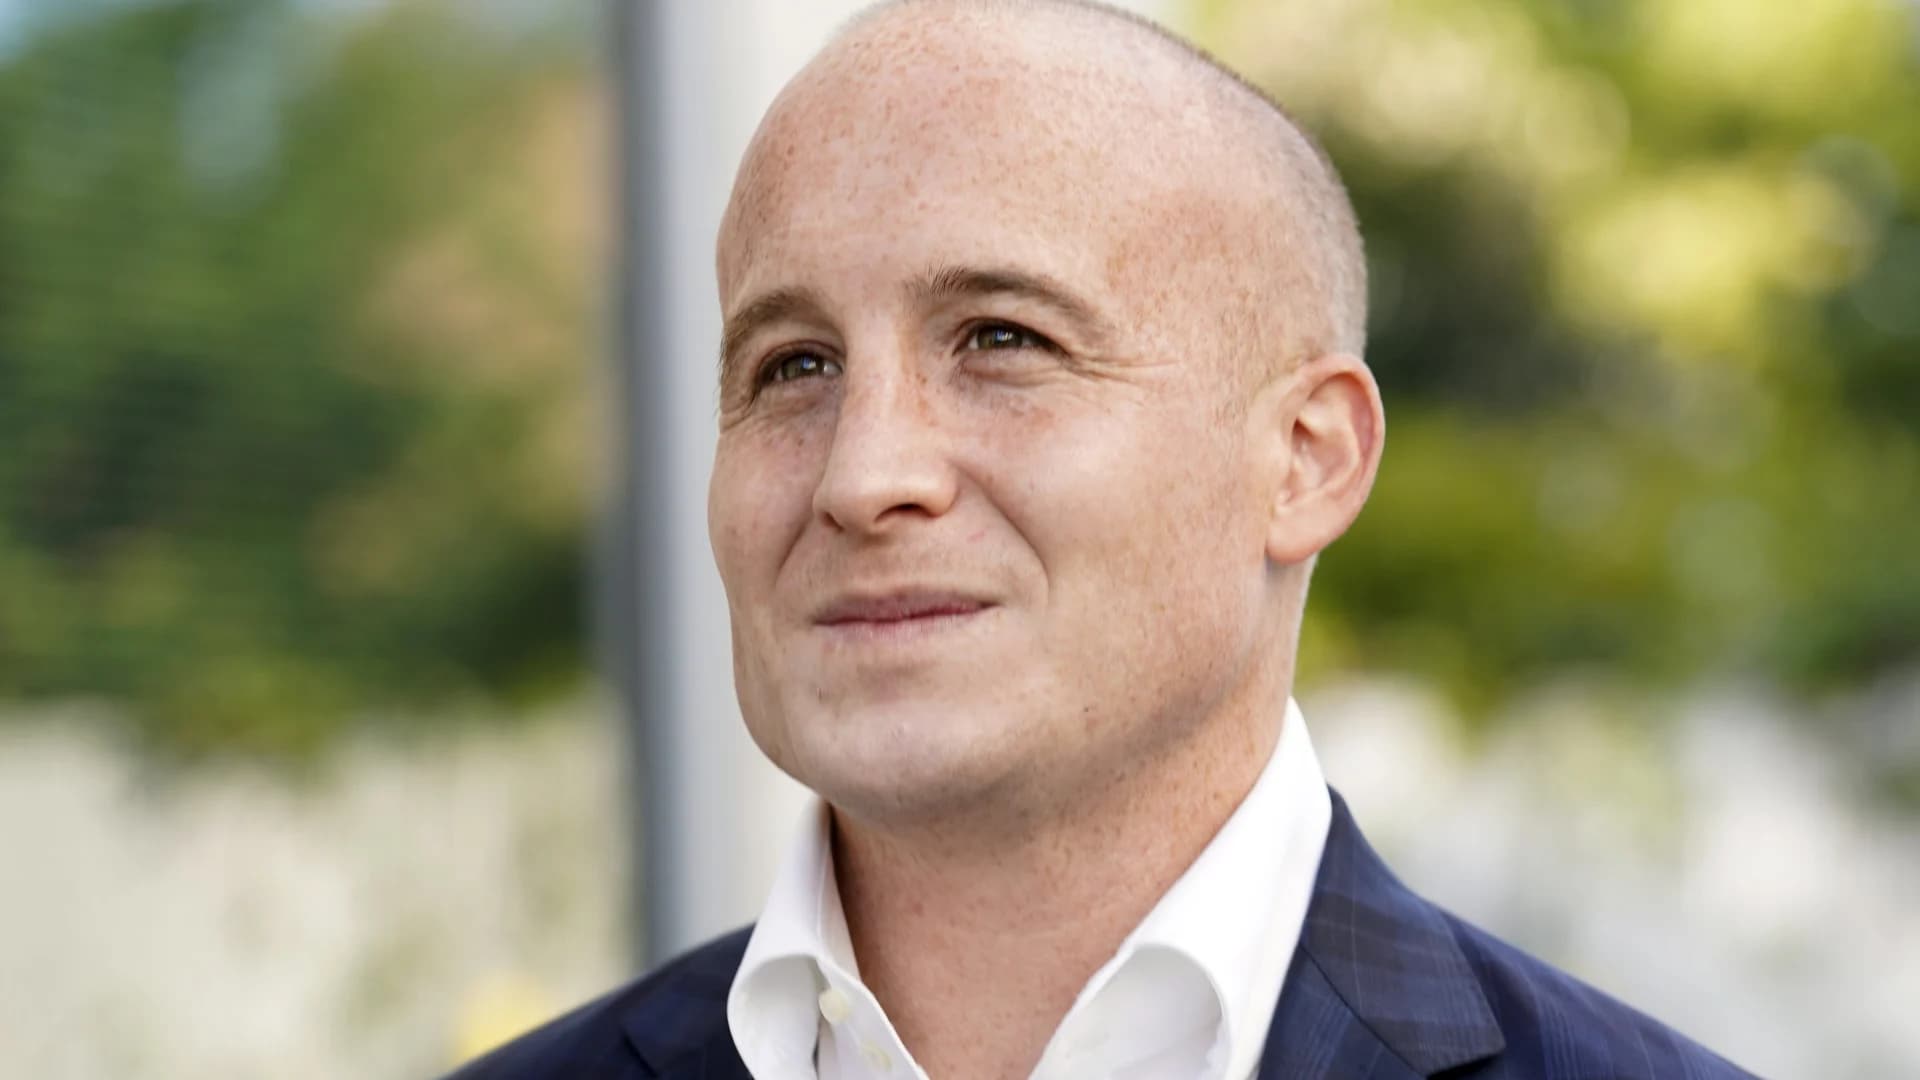 Former Rep. Max Rose announces he will not be running for NYC mayor in 2021